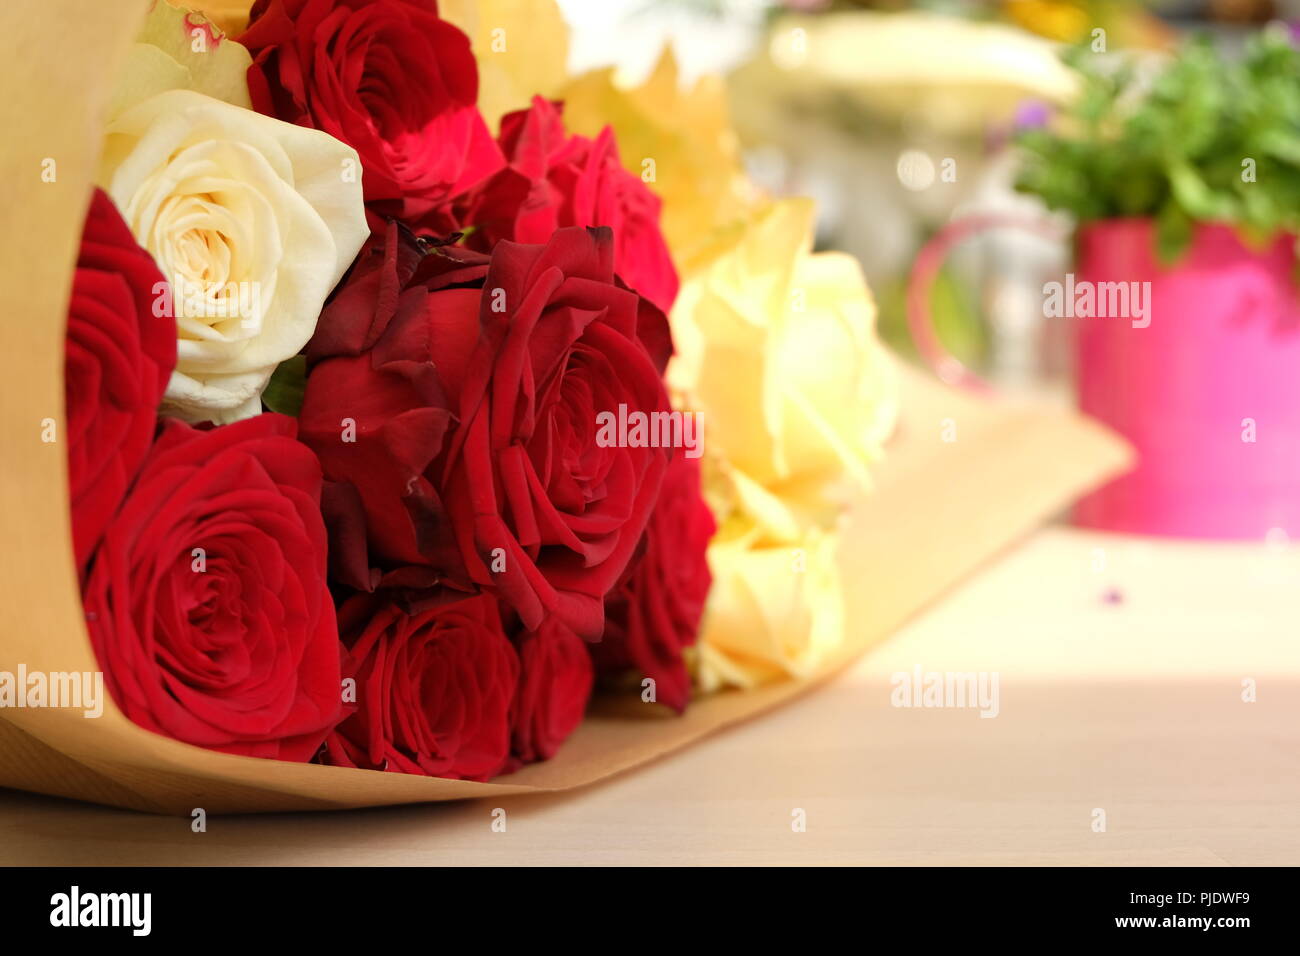 A bouquet of roses lies on a table as an anniversary gift. The strong red colors contrast with the white and brighter colors. Stock Photo